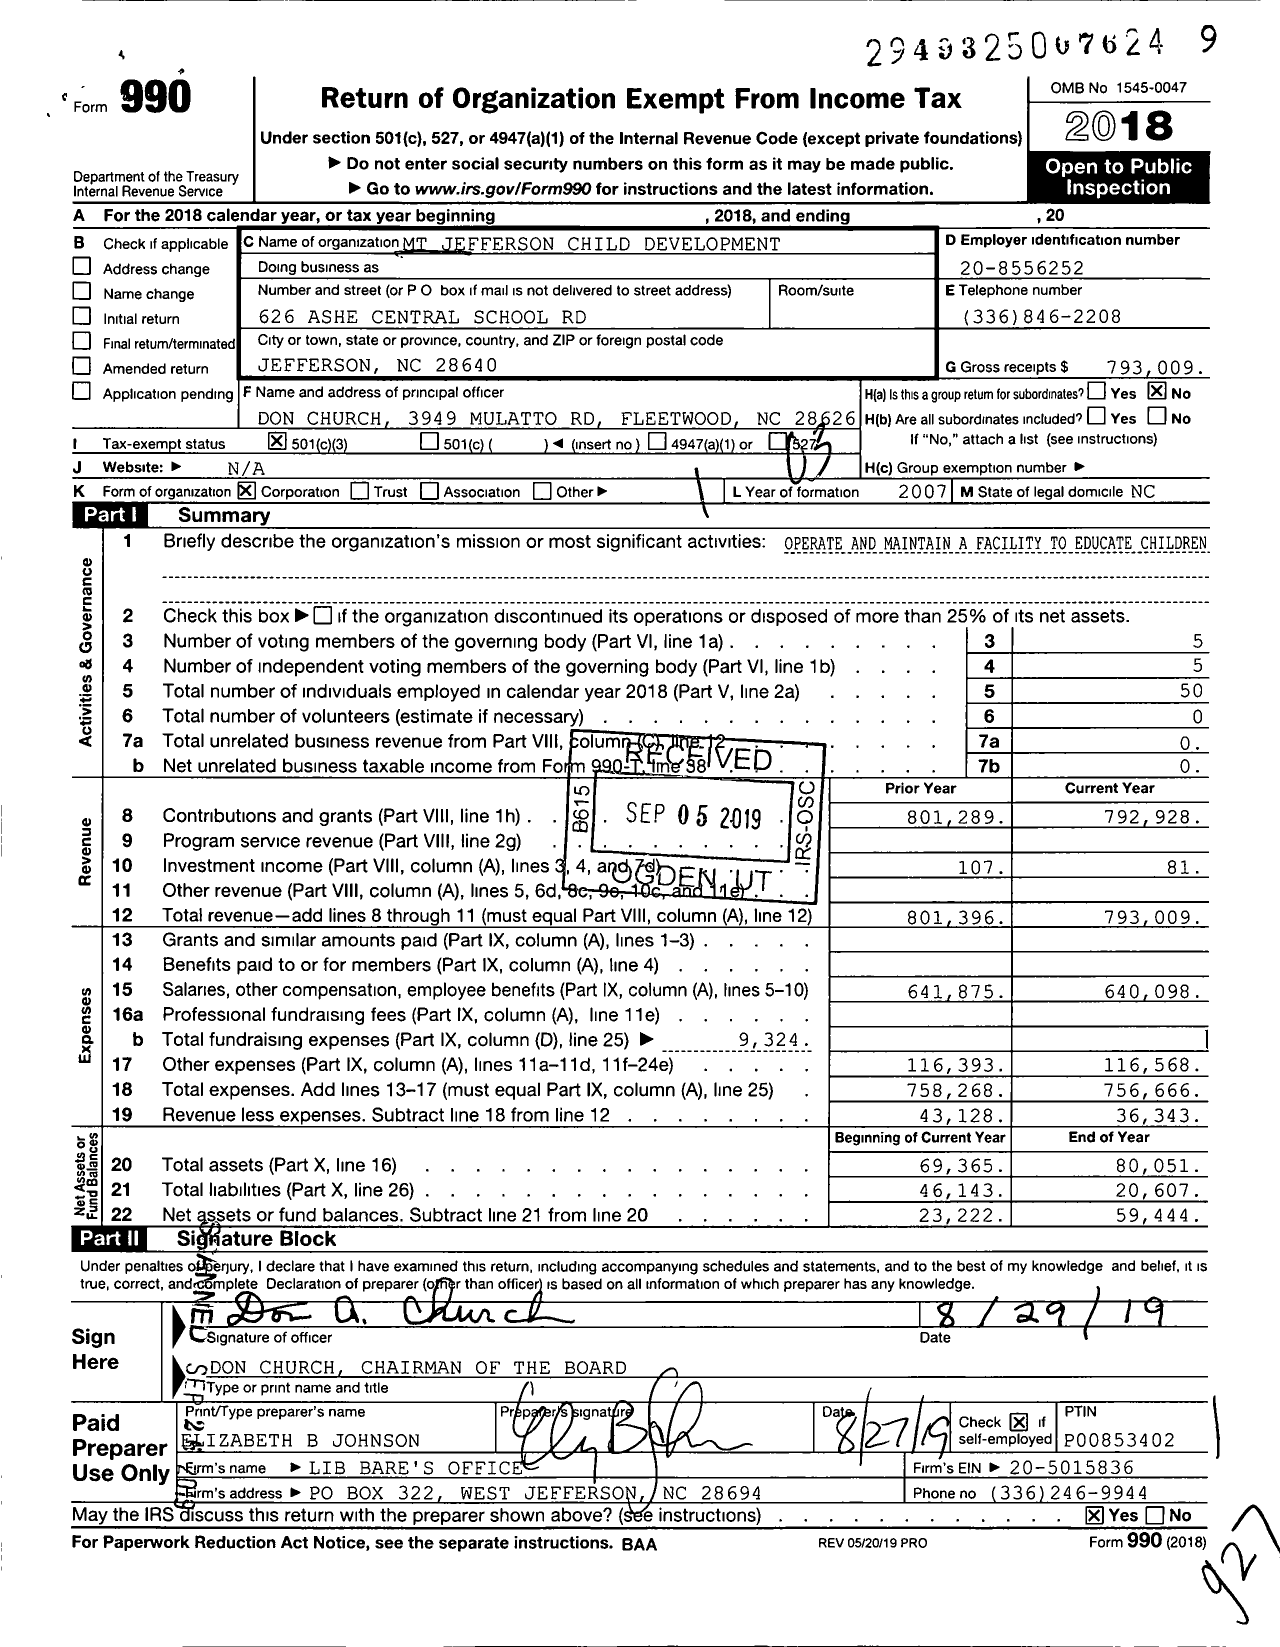 Image of first page of 2018 Form 990 for MT Jefferson Child Development